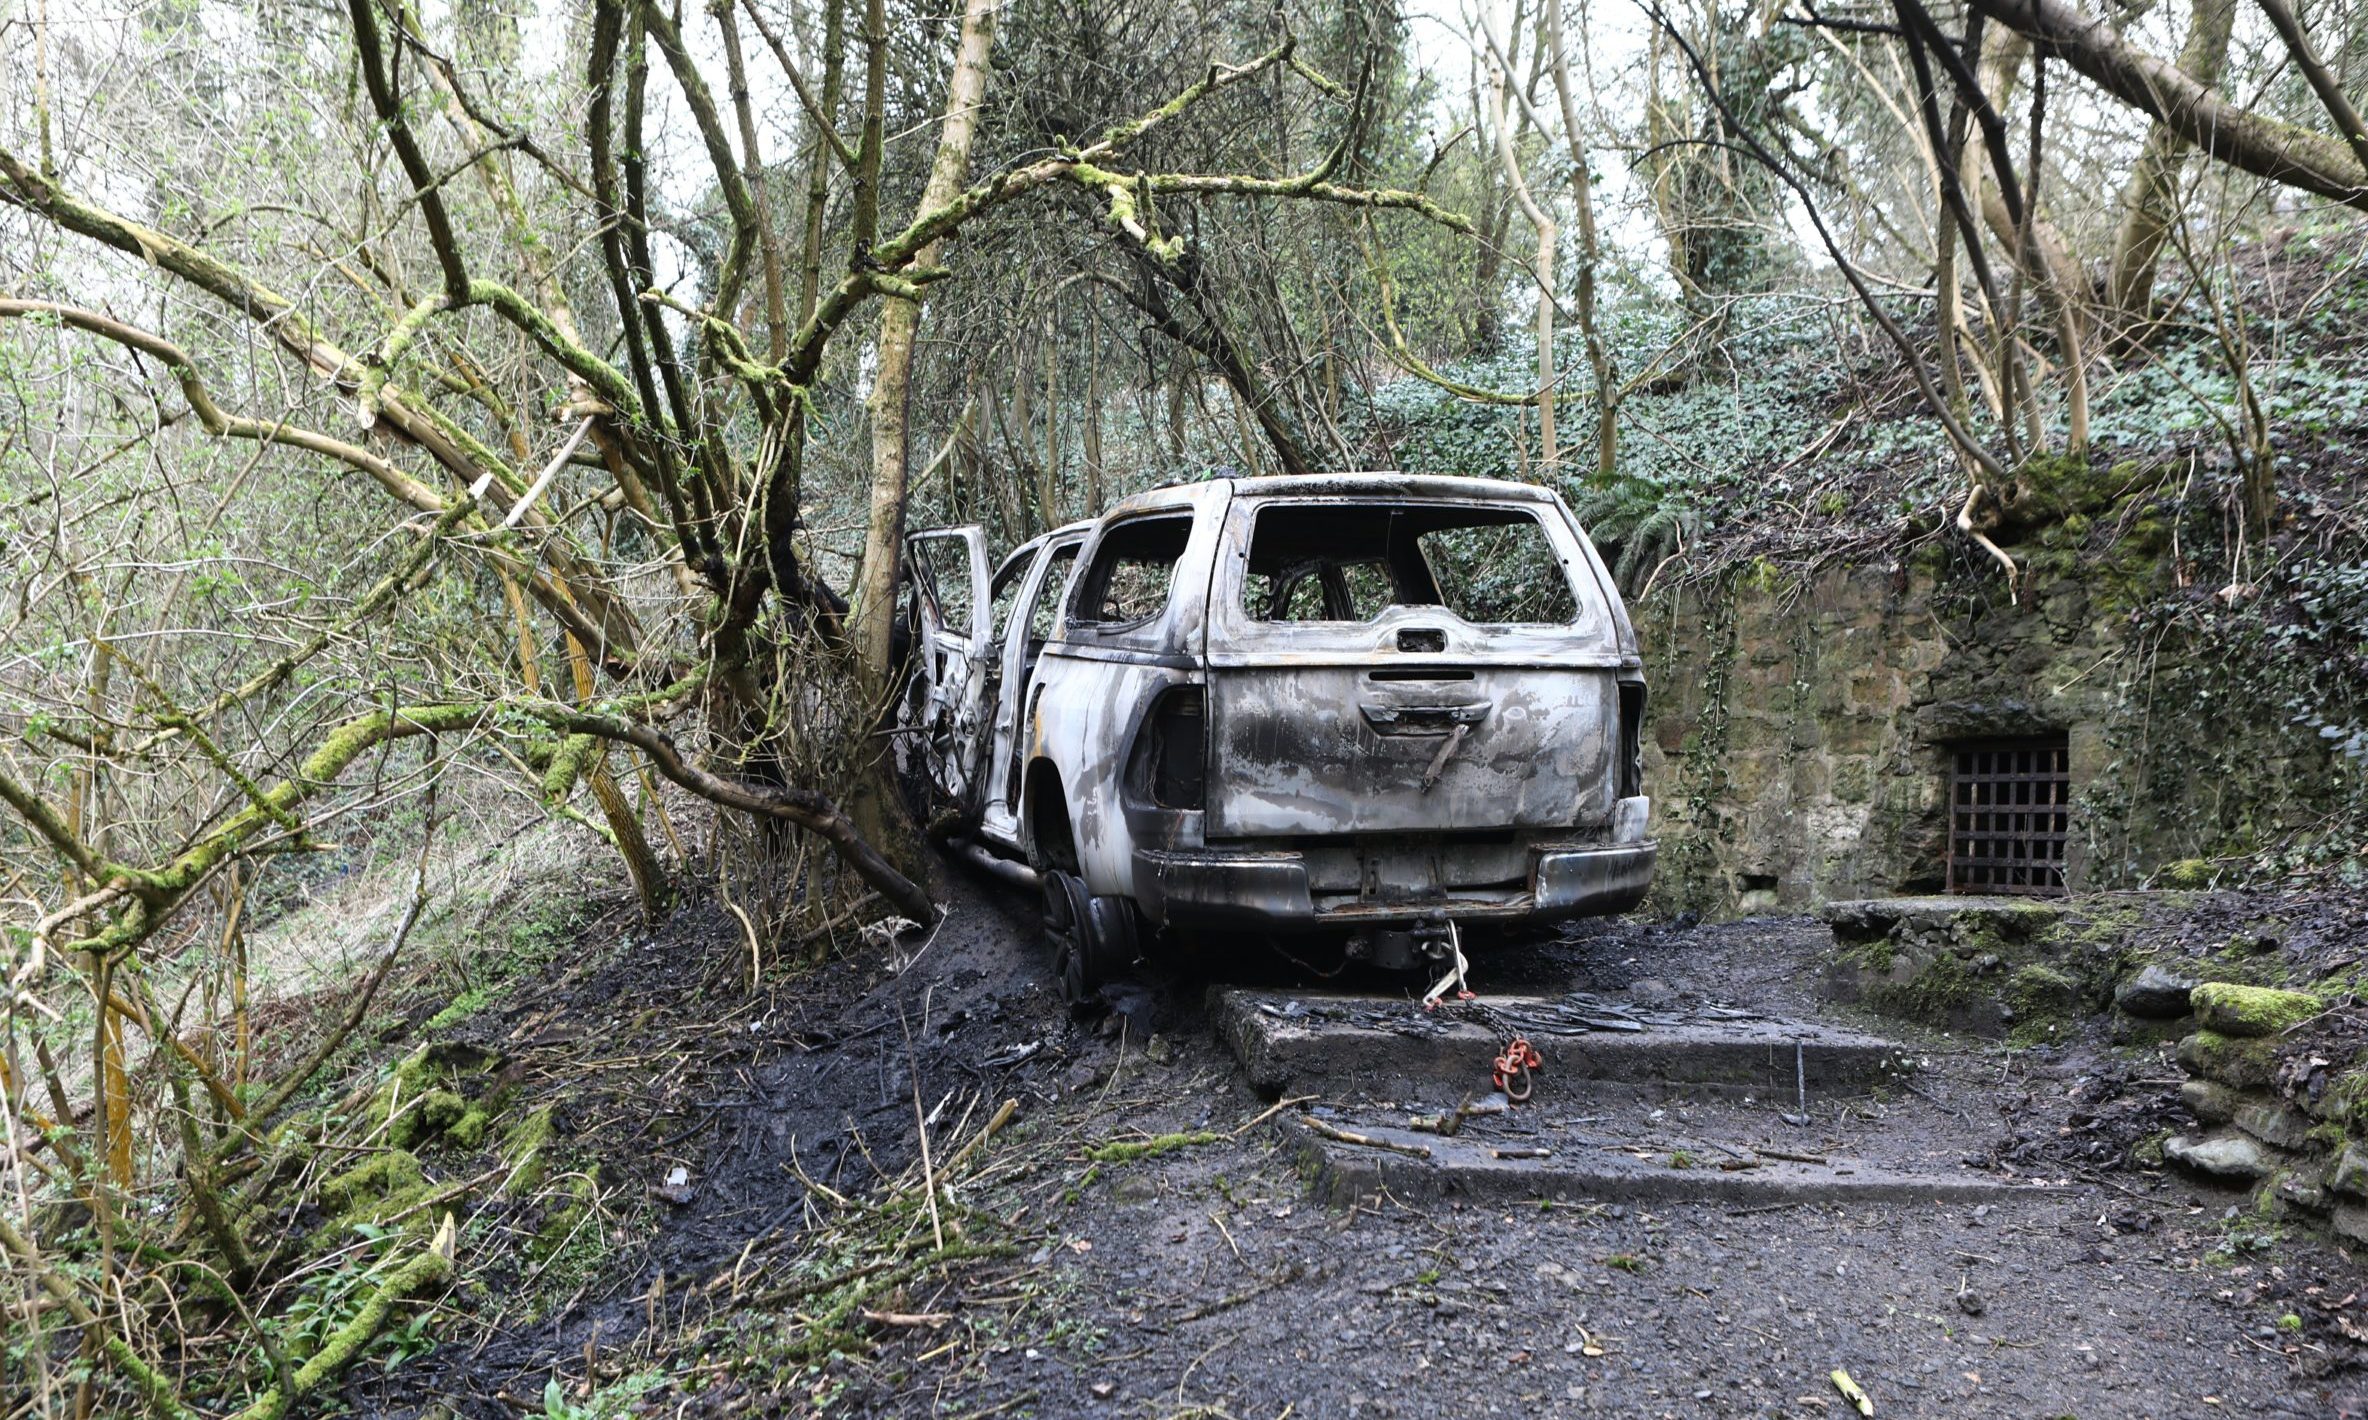 The burnt out car in Kennoway Den, Fife.